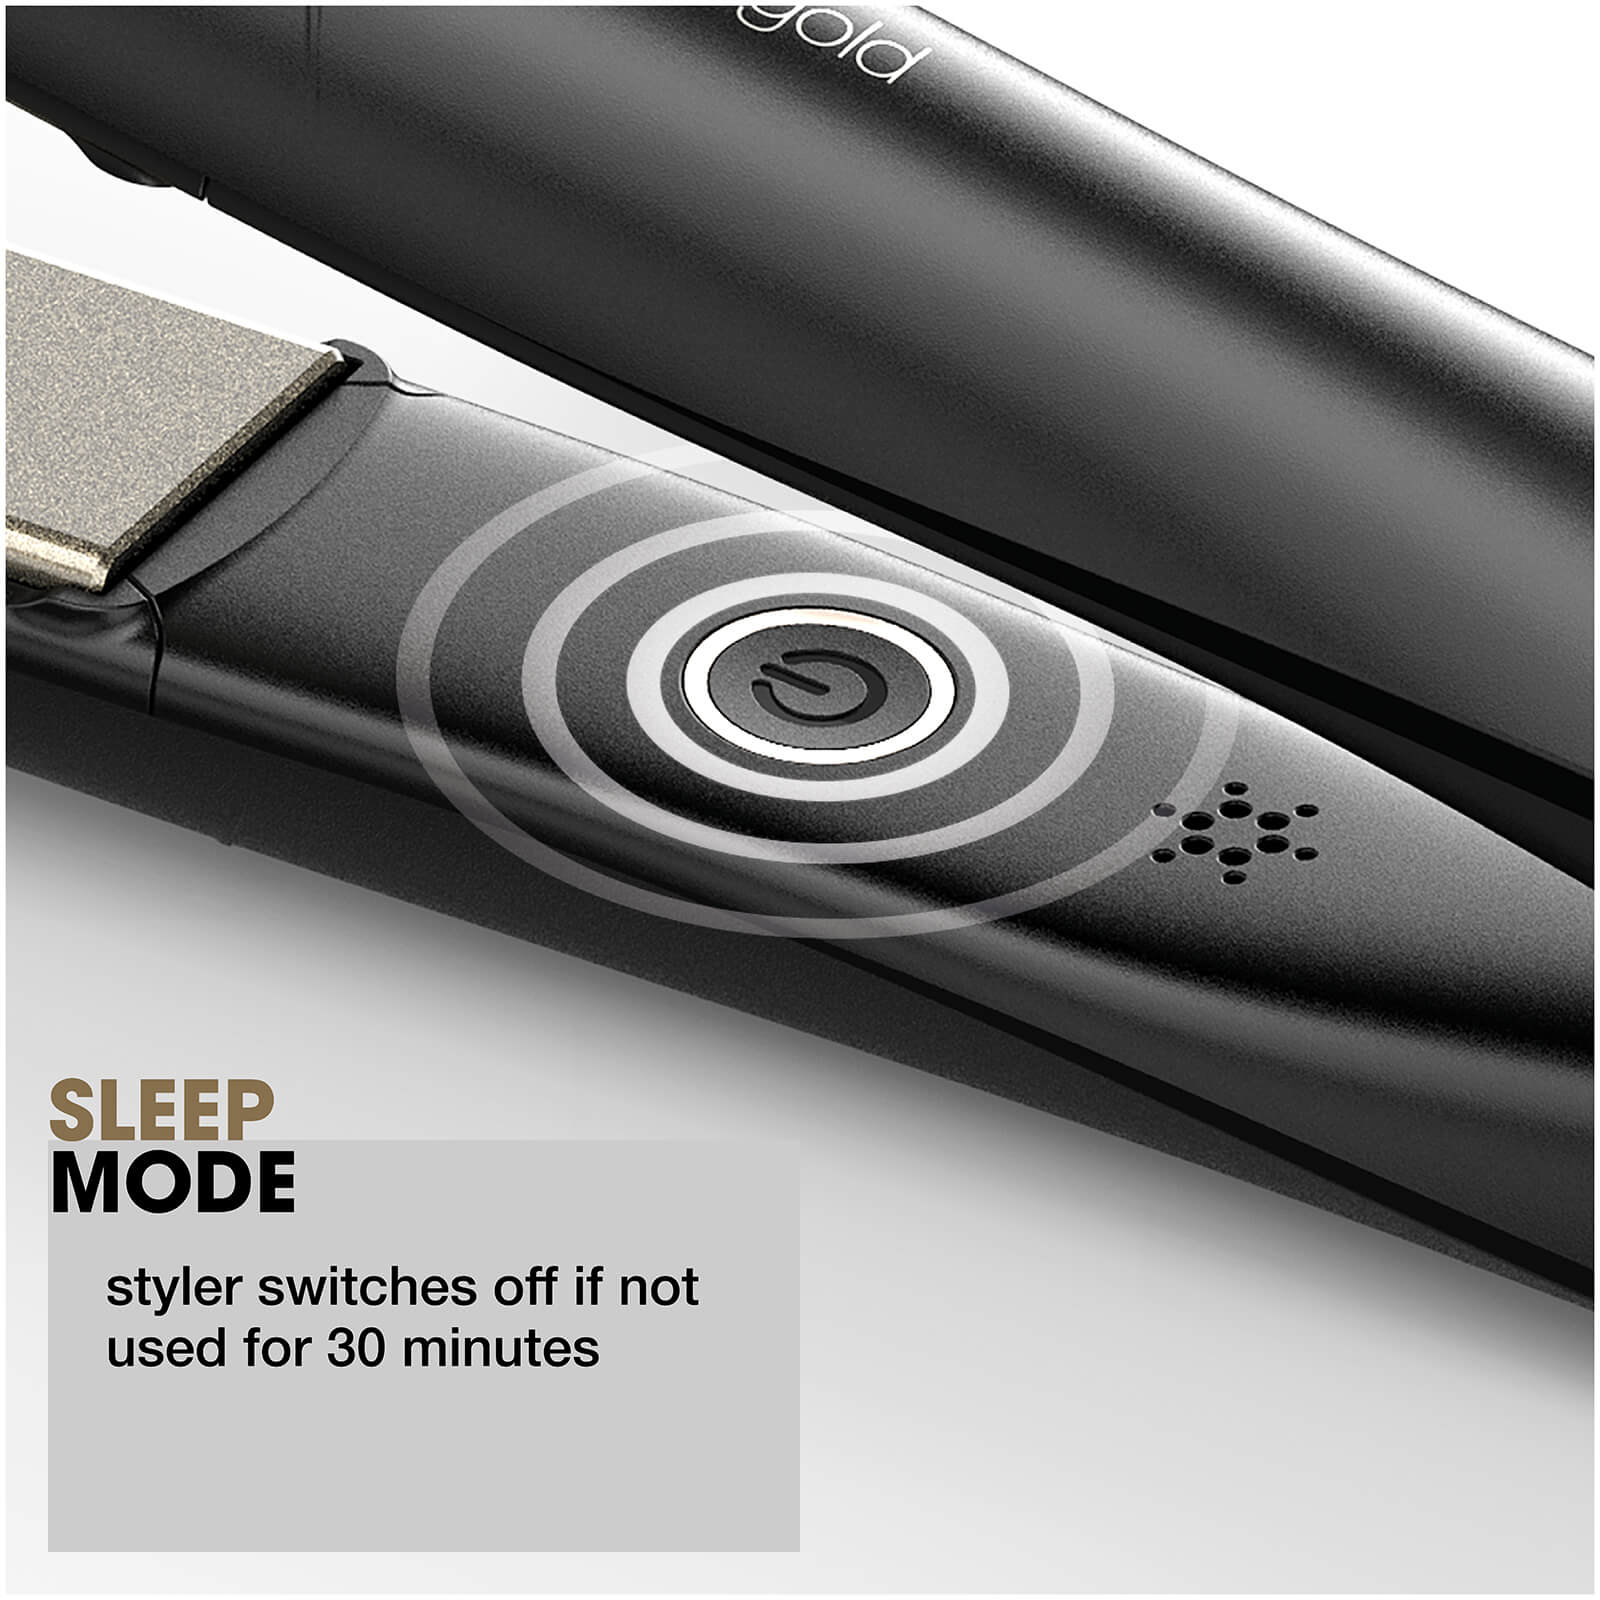 ghd sleep mode switches off if not used after 30mins